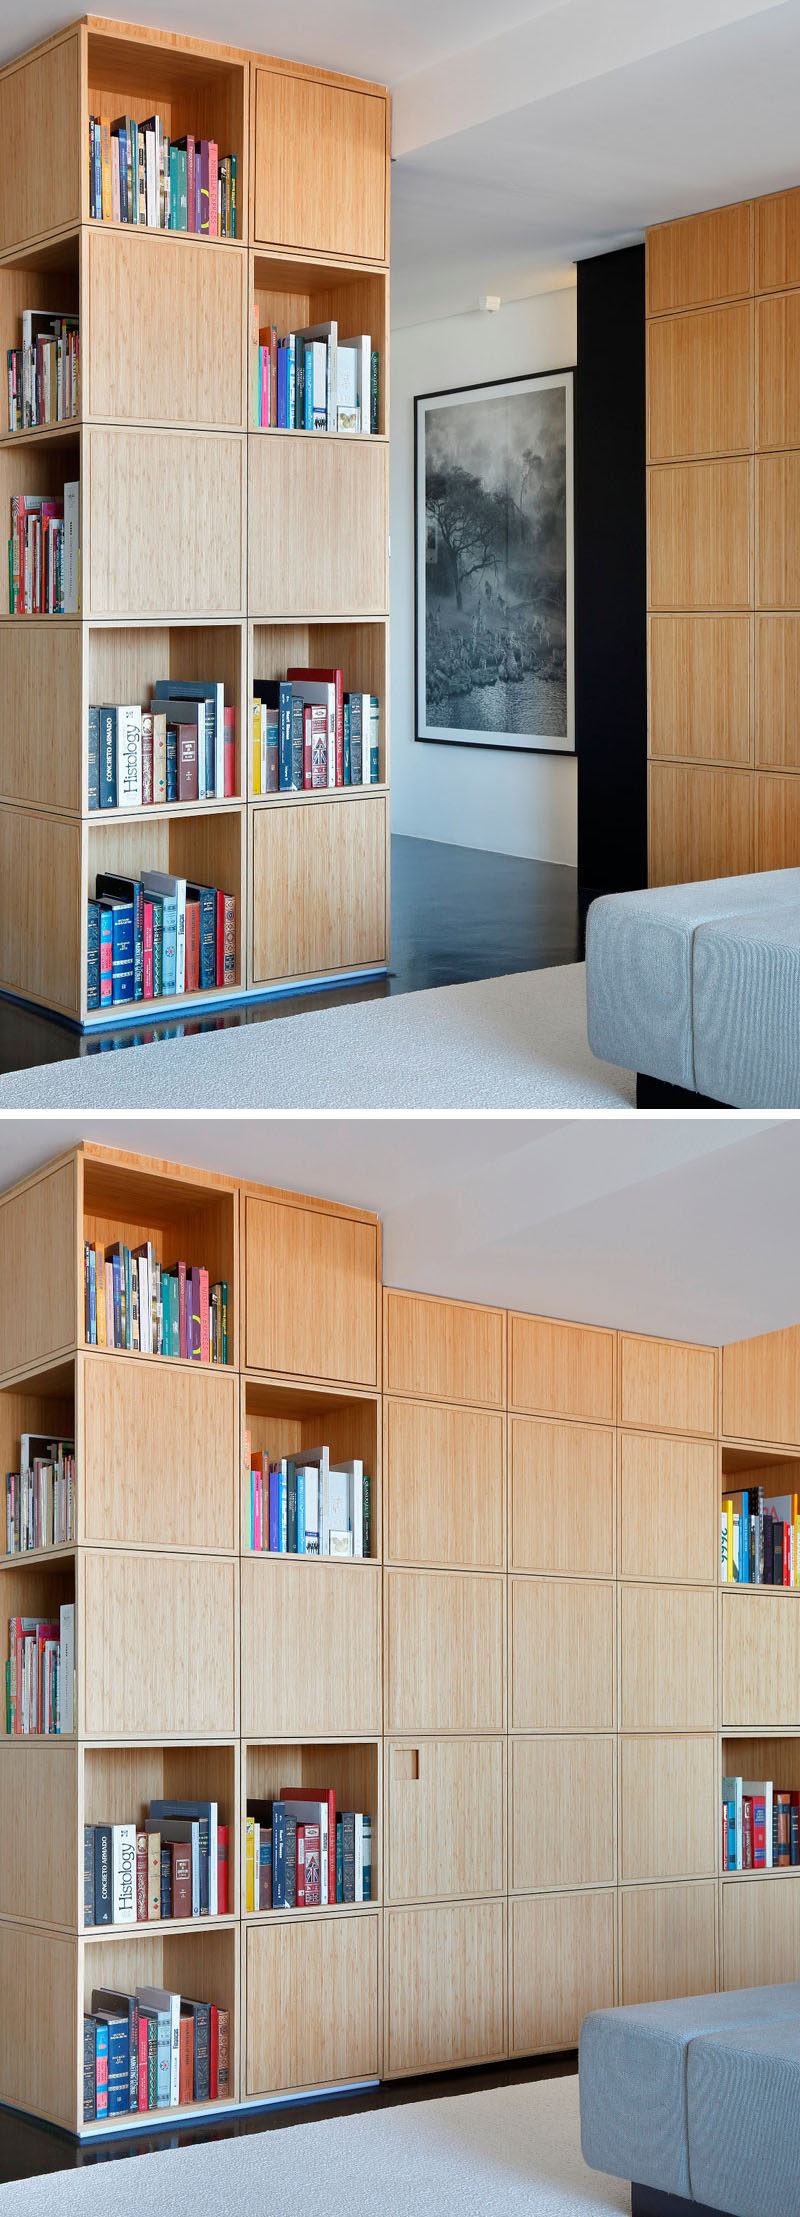 The entry hall to this modern apartment is concealed behind a u-shaped wood bookcase and is hidden from view when the door closes and blends into the rest of the bookcase.